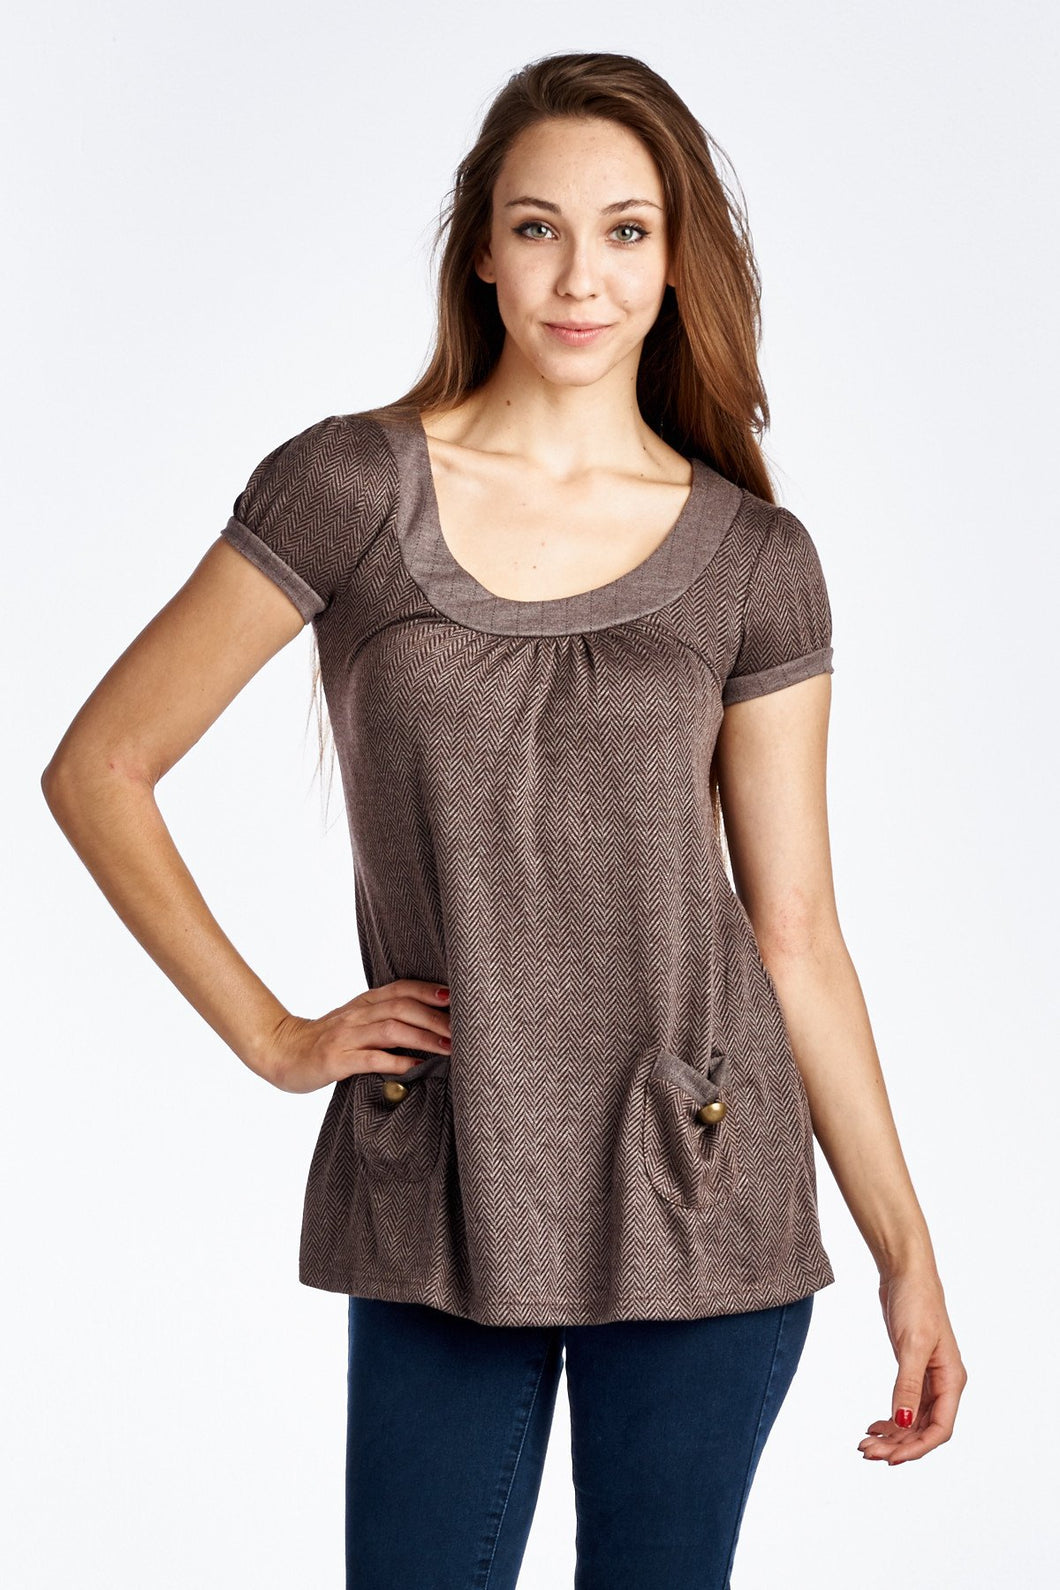 Coolwear Bell Sleeve Tunic with Front Pocket Detail - WholesaleClothingDeals - 1